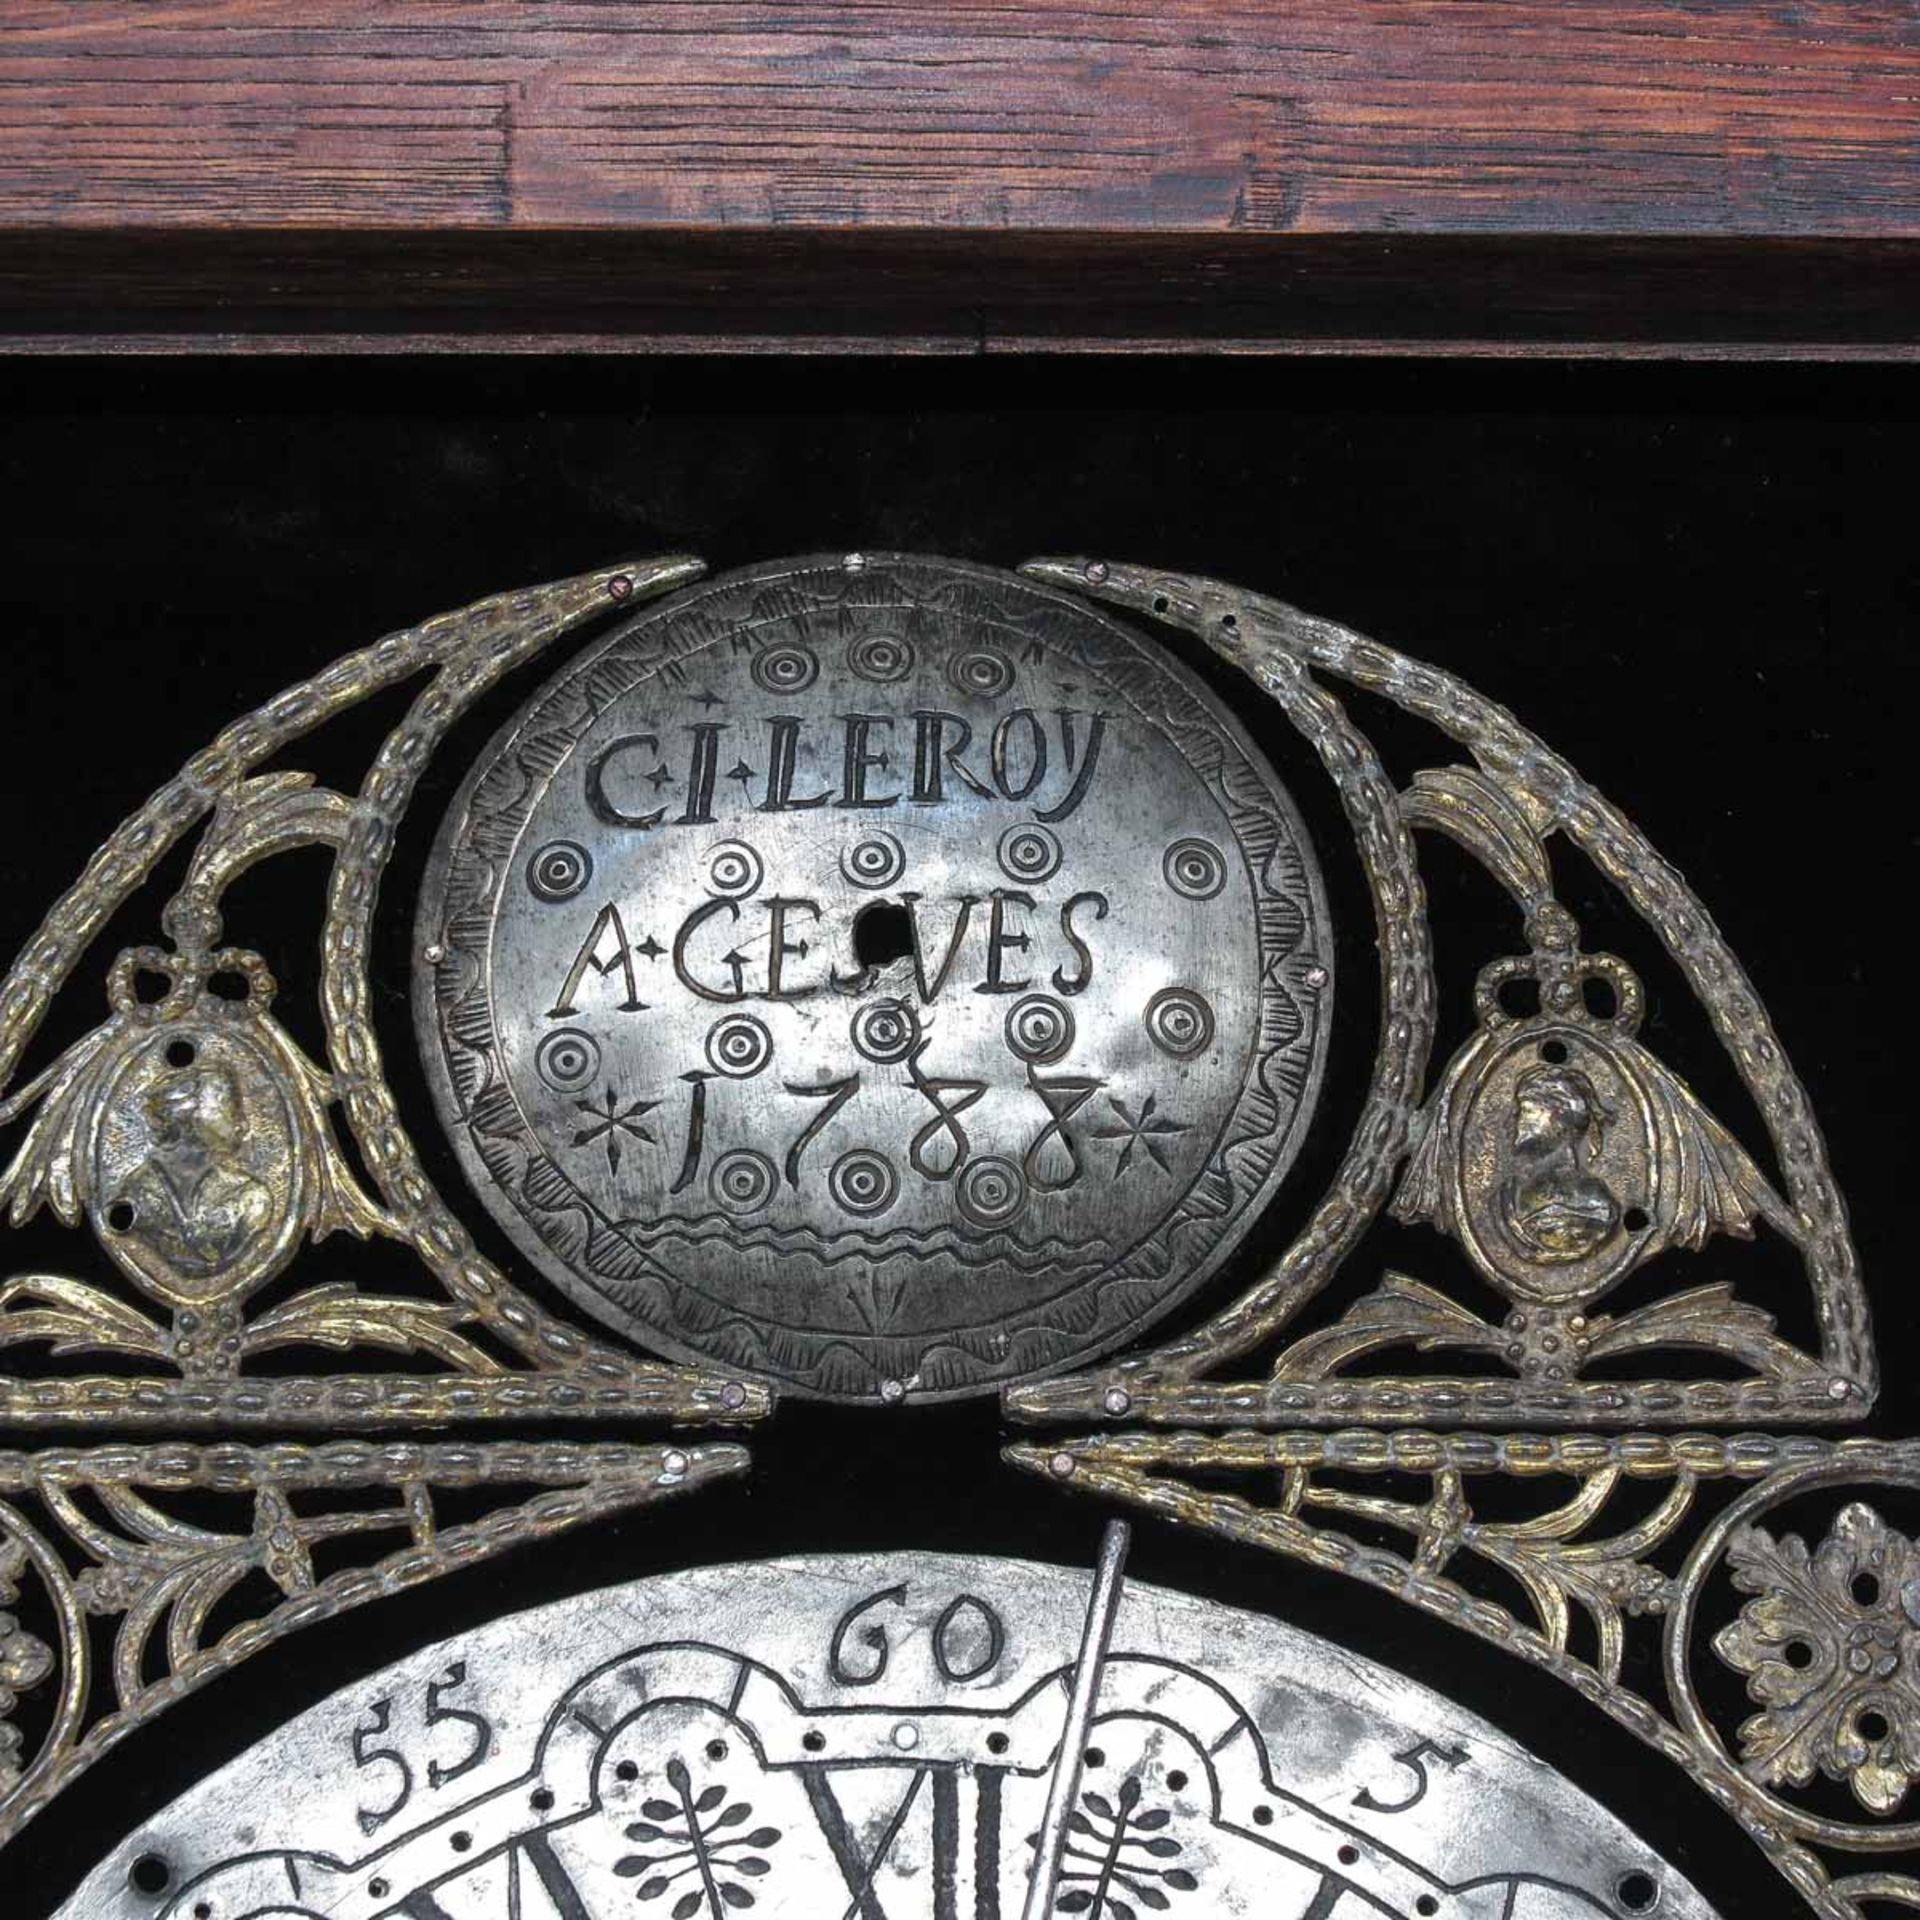 A Standing Clock Signed C.I. LeRoy a Gesves - Image 5 of 10